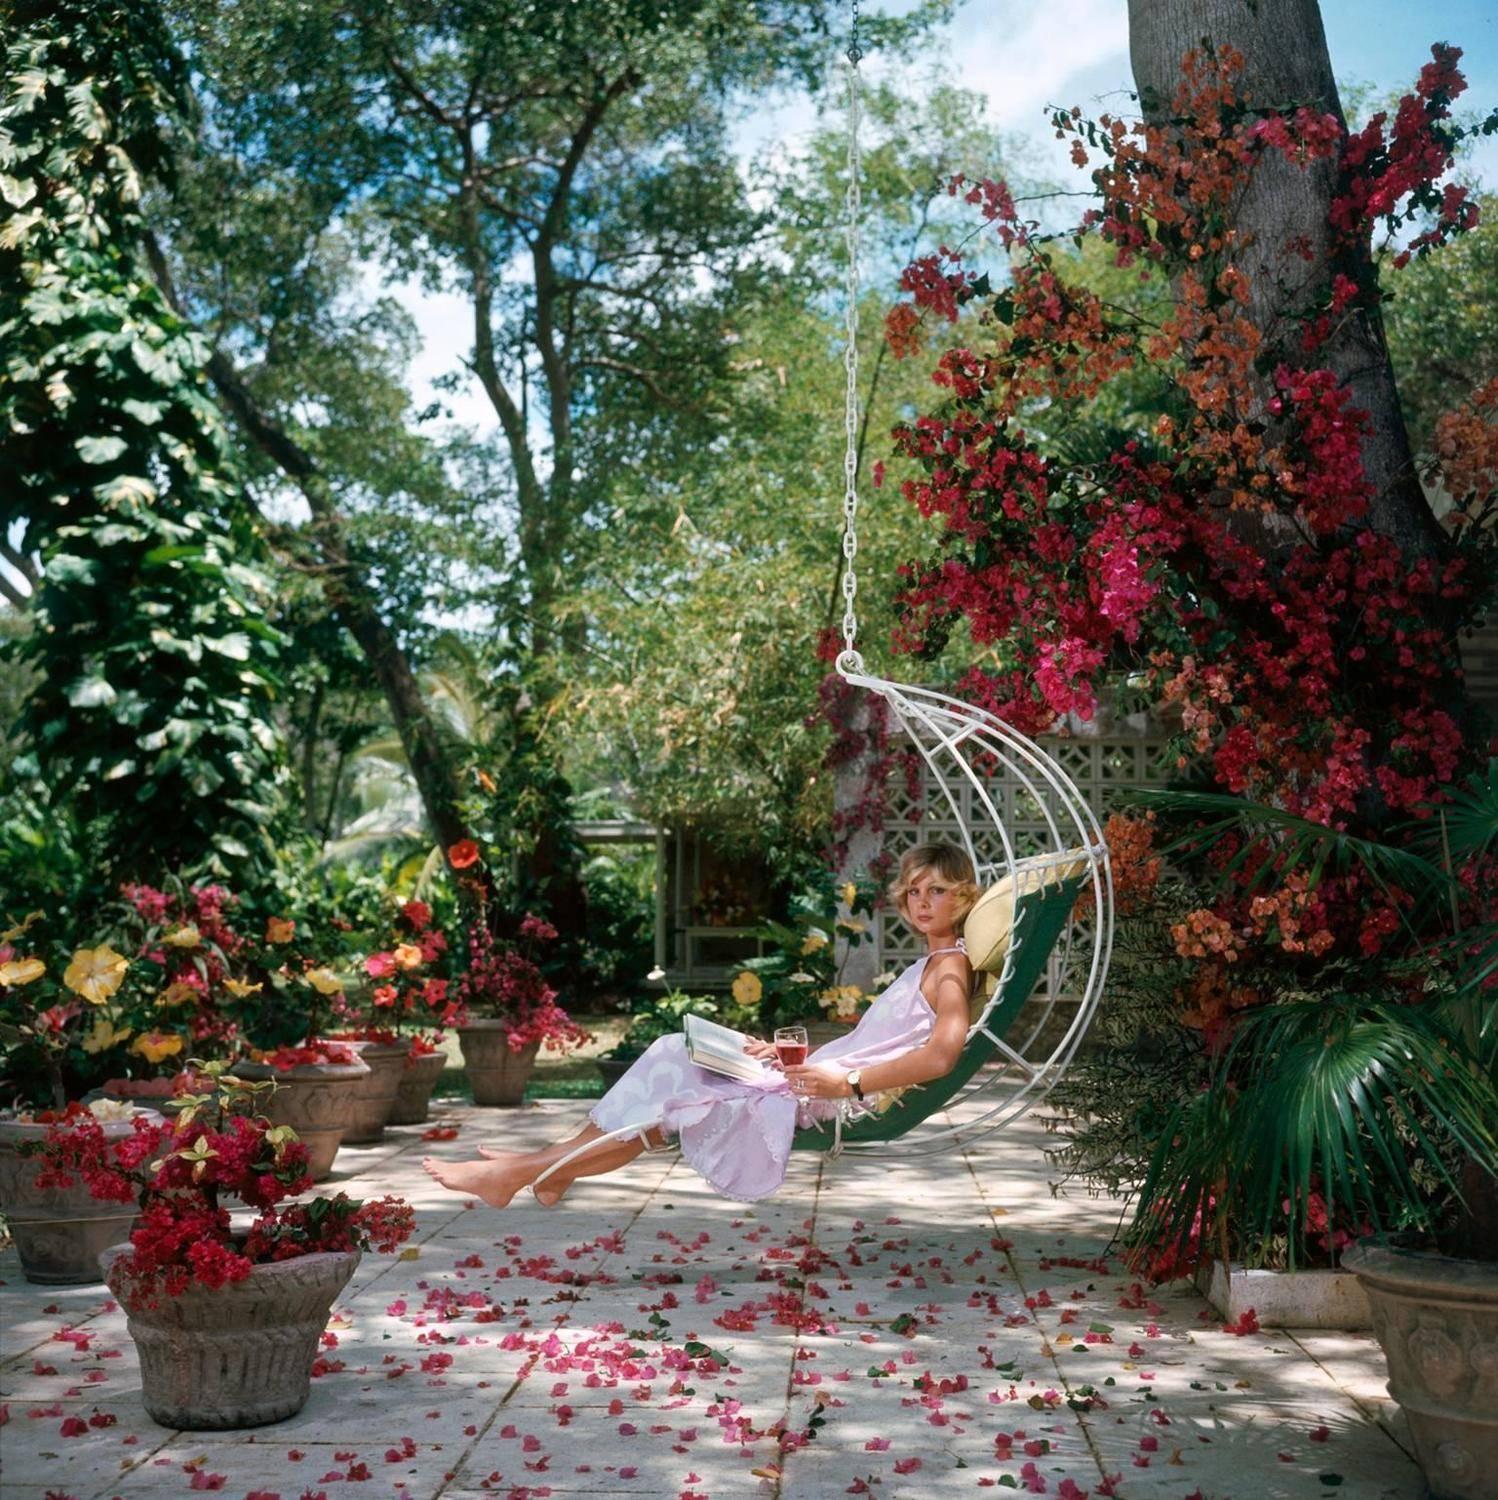 Ava Marshall relaxes with a book amongst the bougainvillea in Barbados, April 1976.

Estate stamped and hand numbered edition of 150 with certificate of authenticity from the estate.   

Slim Aarons (1916-2006) worked mainly for society